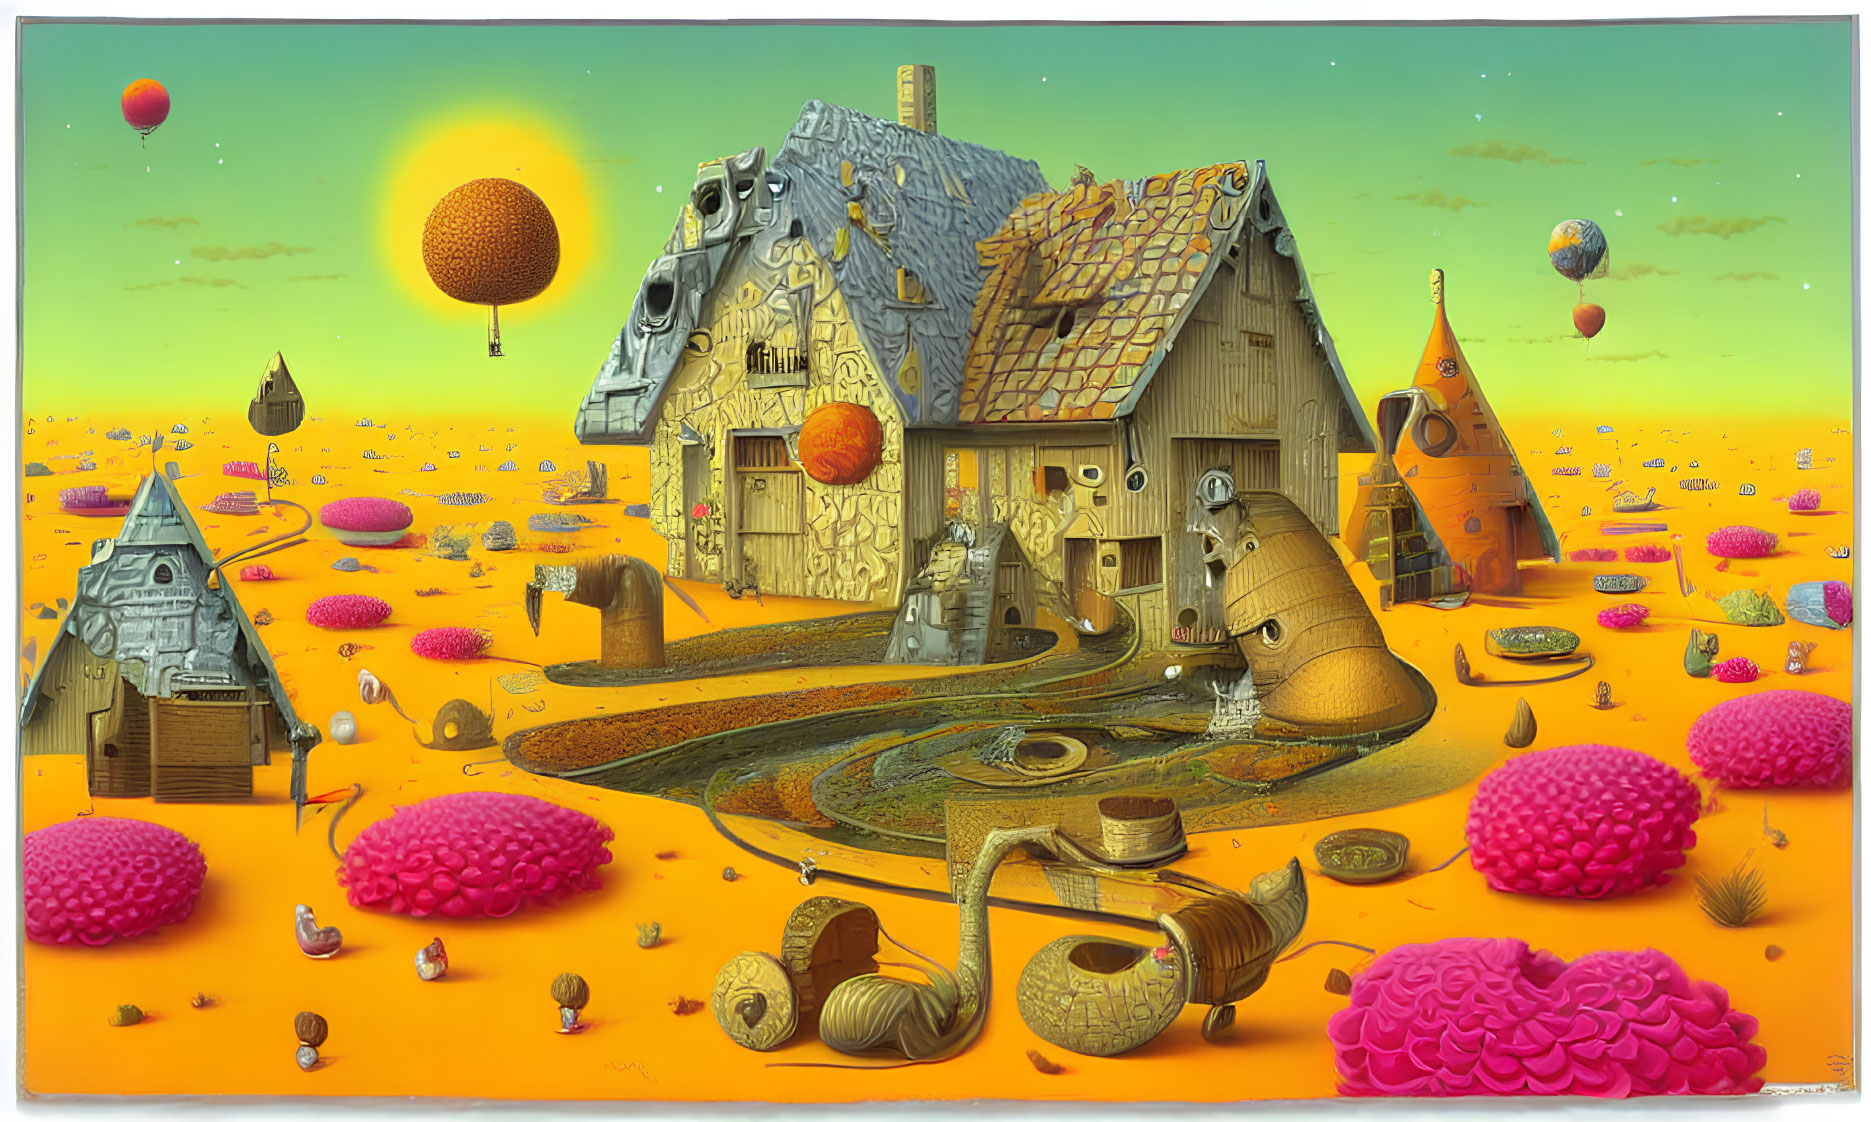 Surreal landscape with brain-shaped trees, cottage, and floating orbs